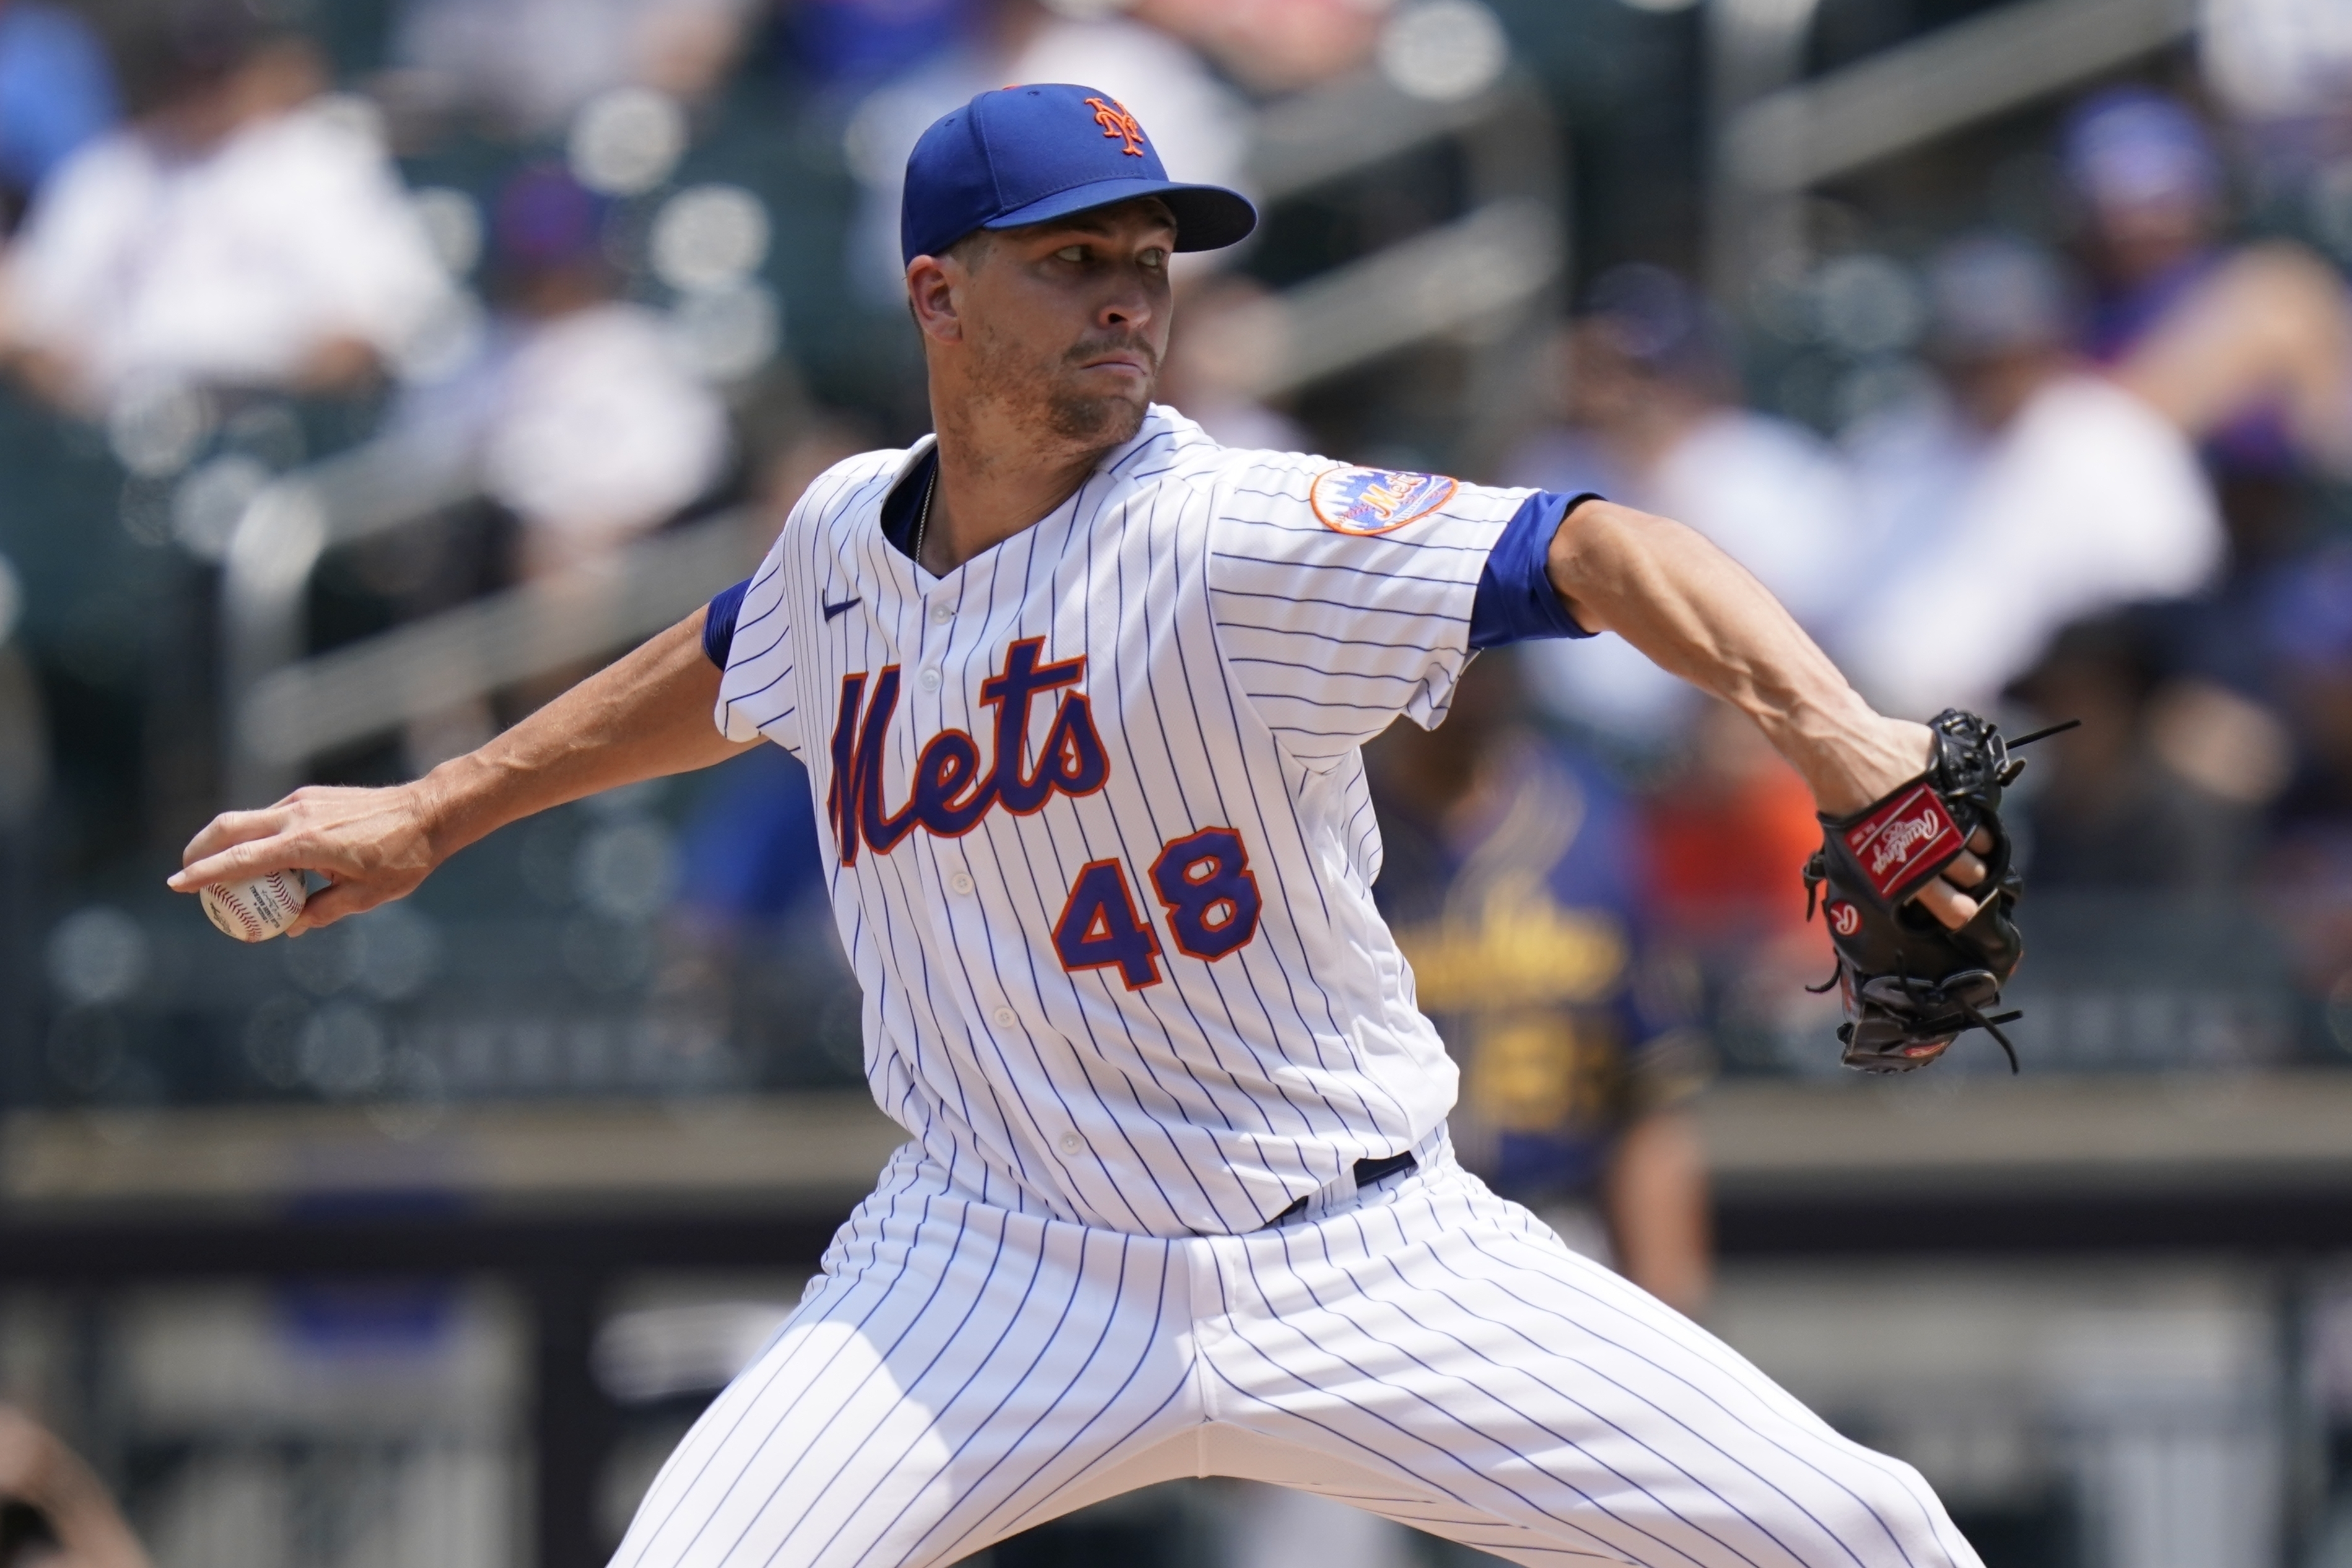 The Atlanta Braves should sign Mets' All-Star Jacob deGrom